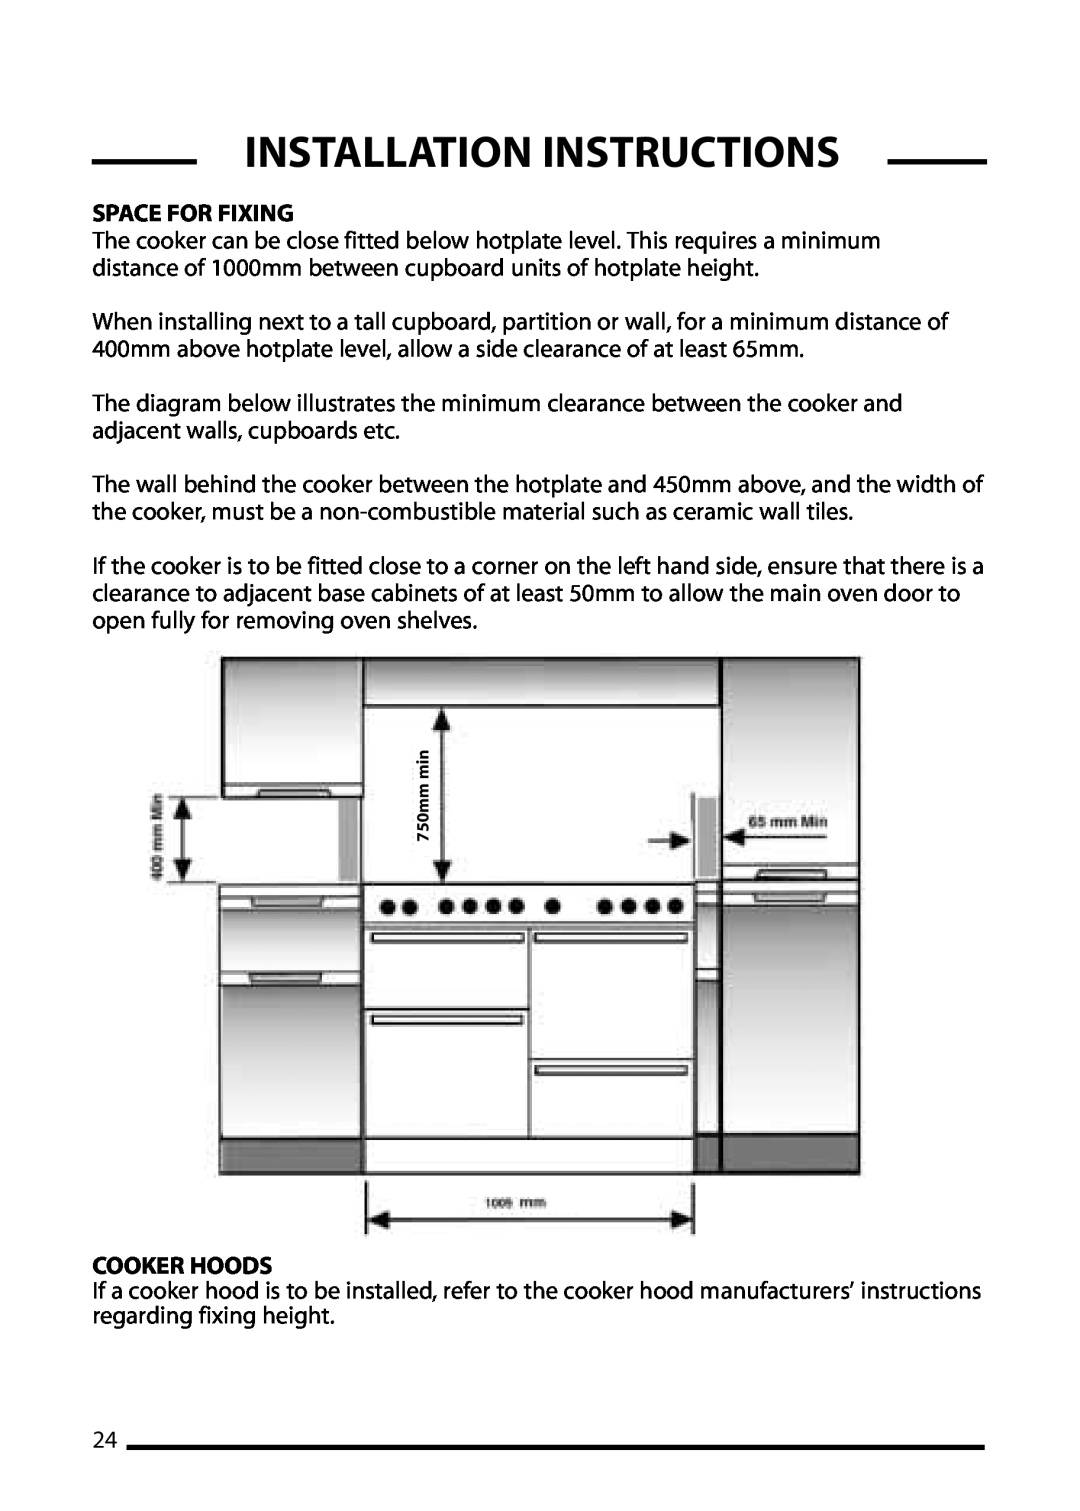 Cannon ICON 1000, 10425G installation instructions Space For Fixing, Cooker Hoods, Installation Instructions, 750mm min 